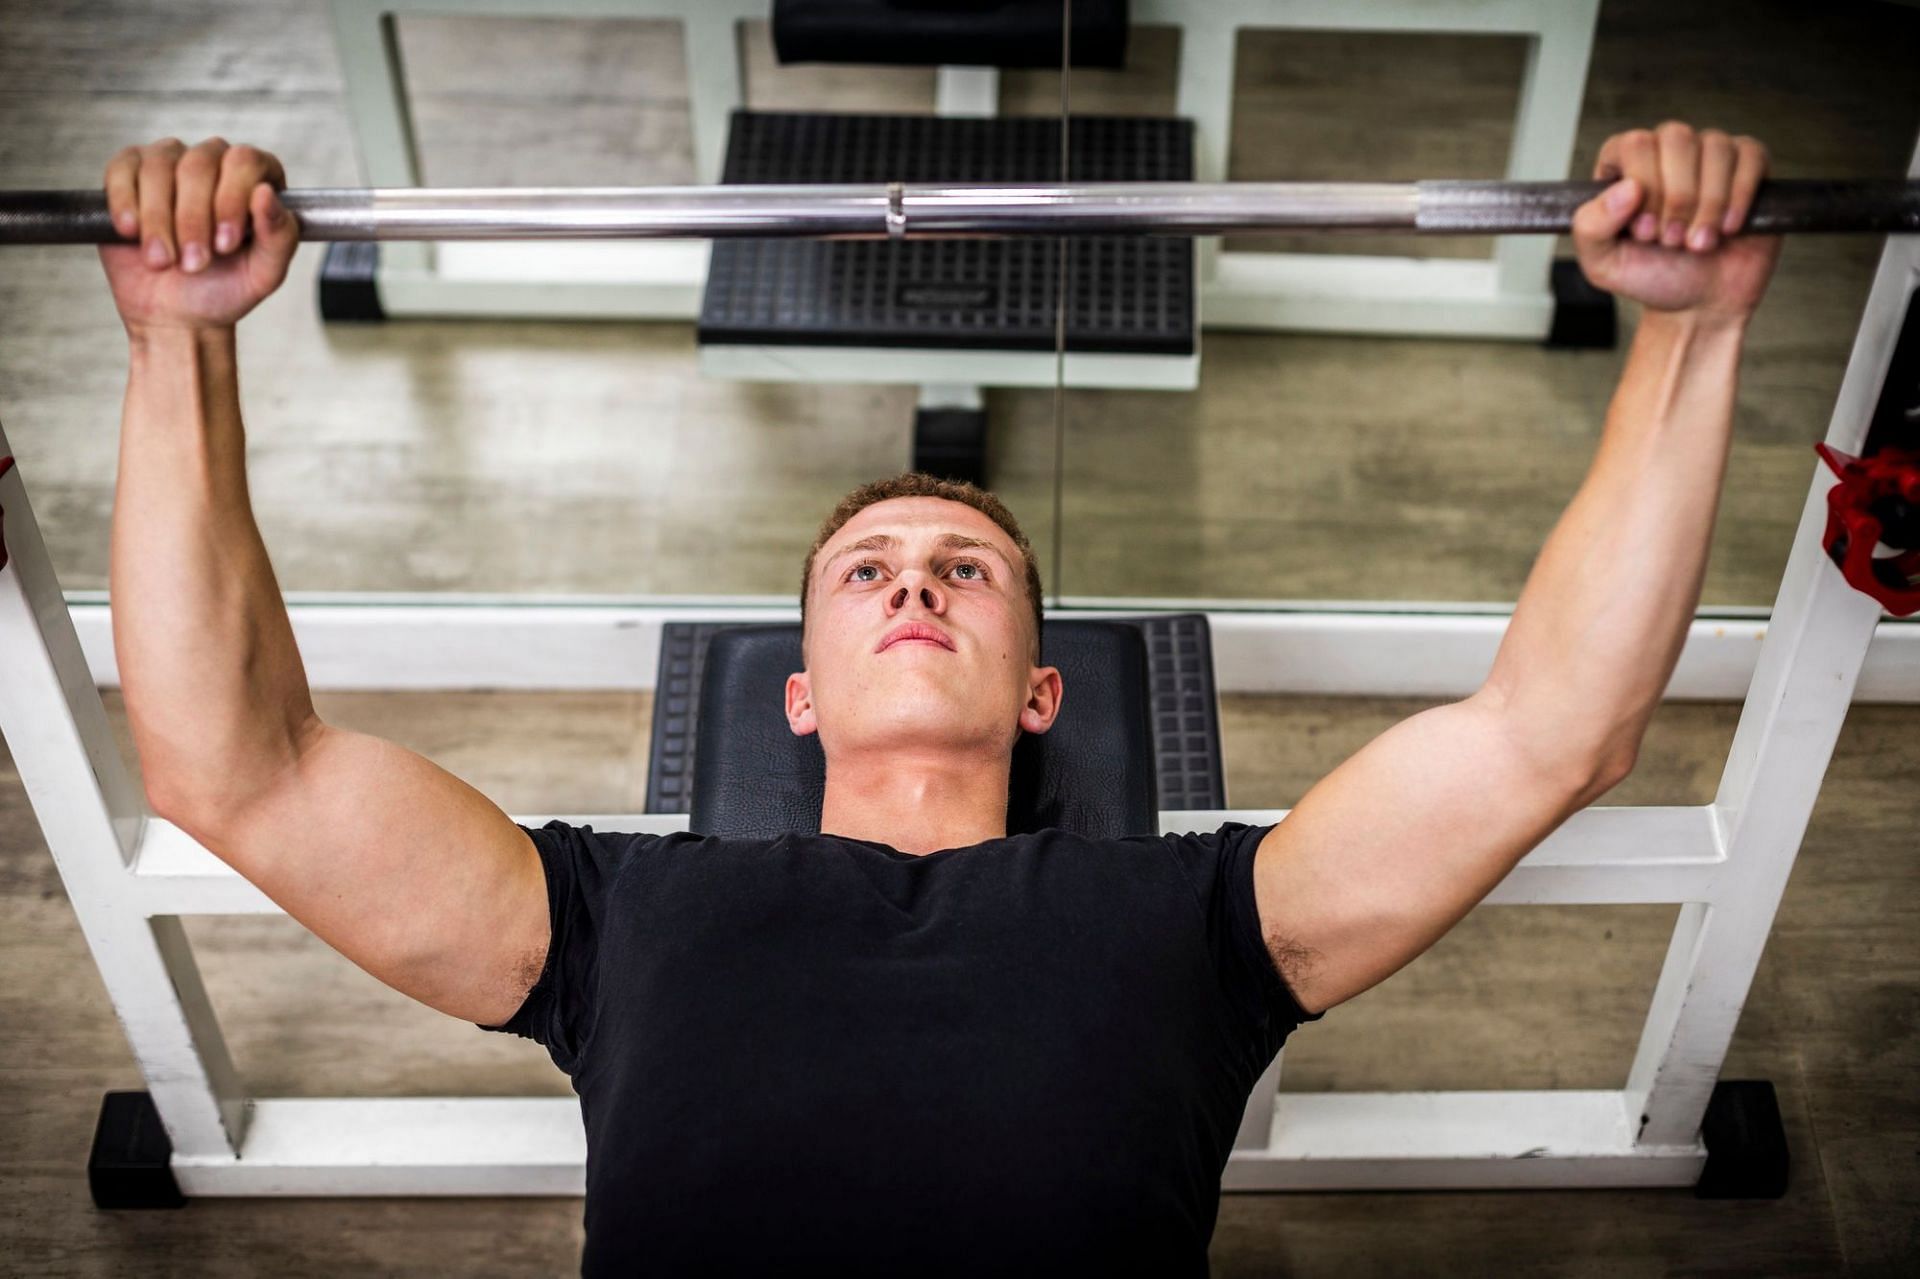 The incline bench press is a great exercise for strong arms. (Image via Freepik)